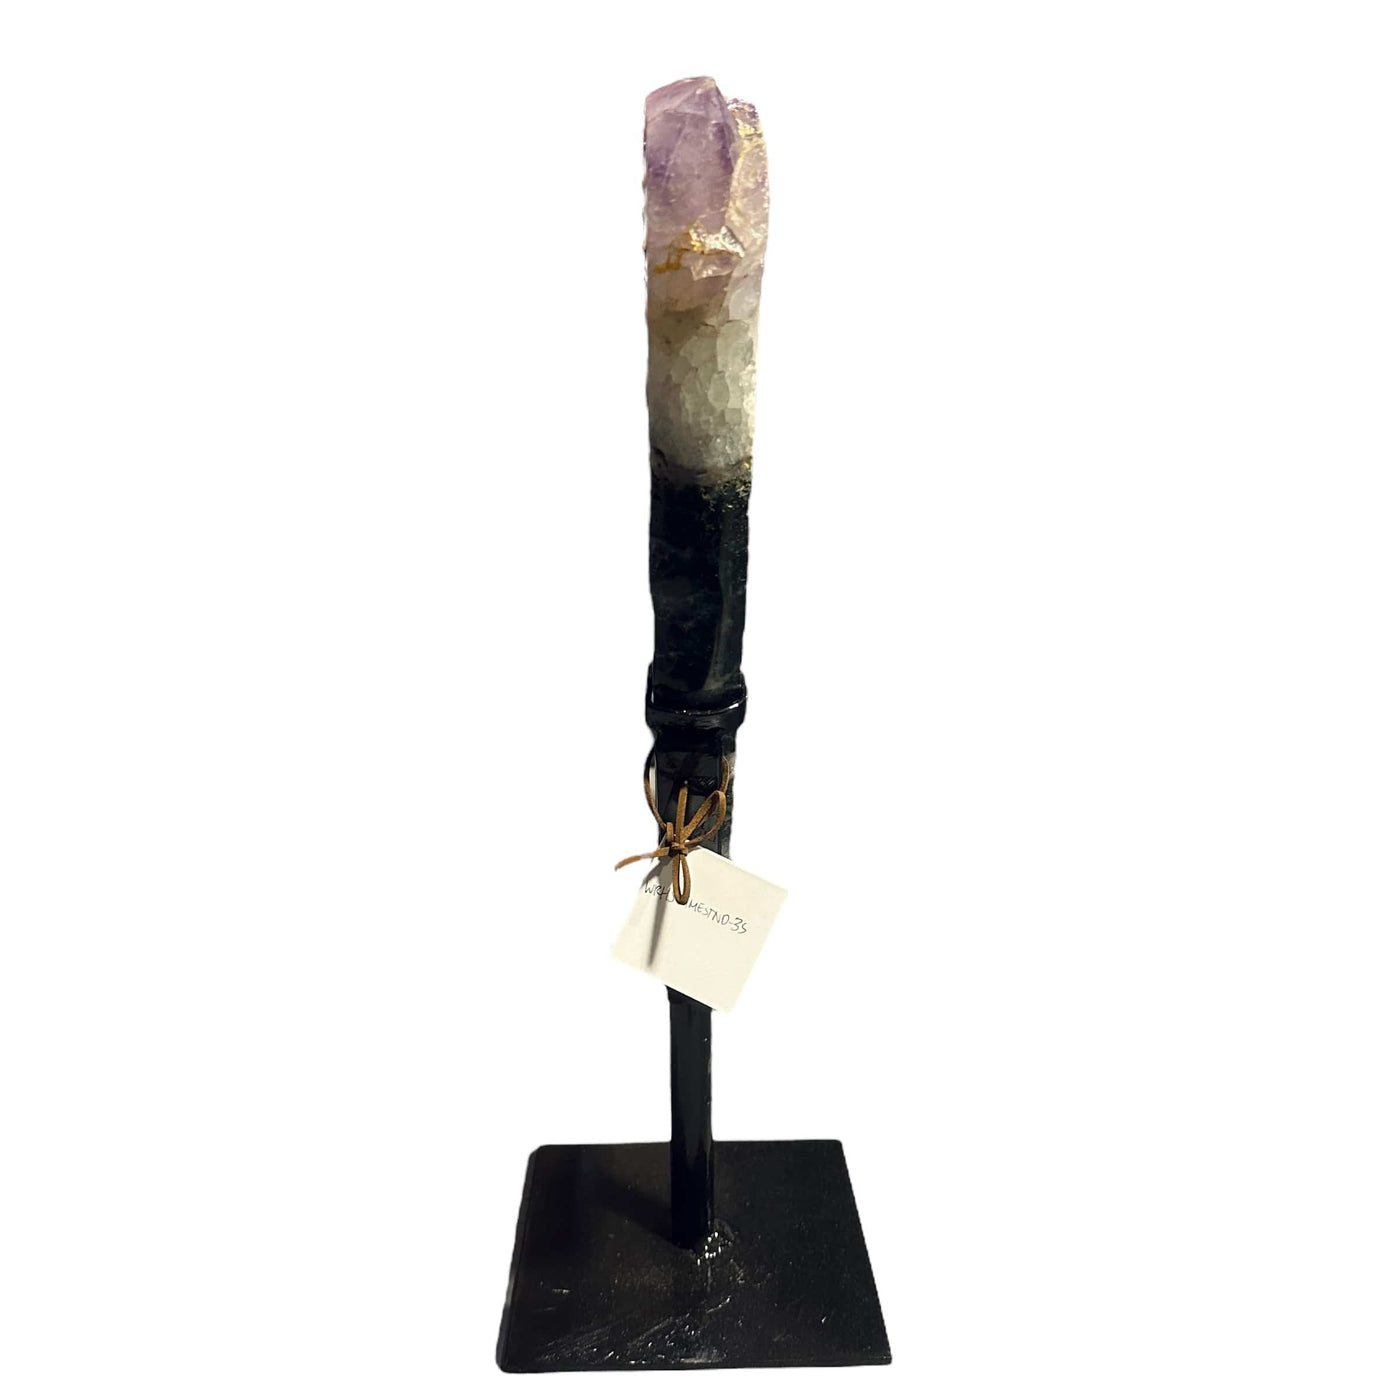 amethyst with jasper on metal stand on white background